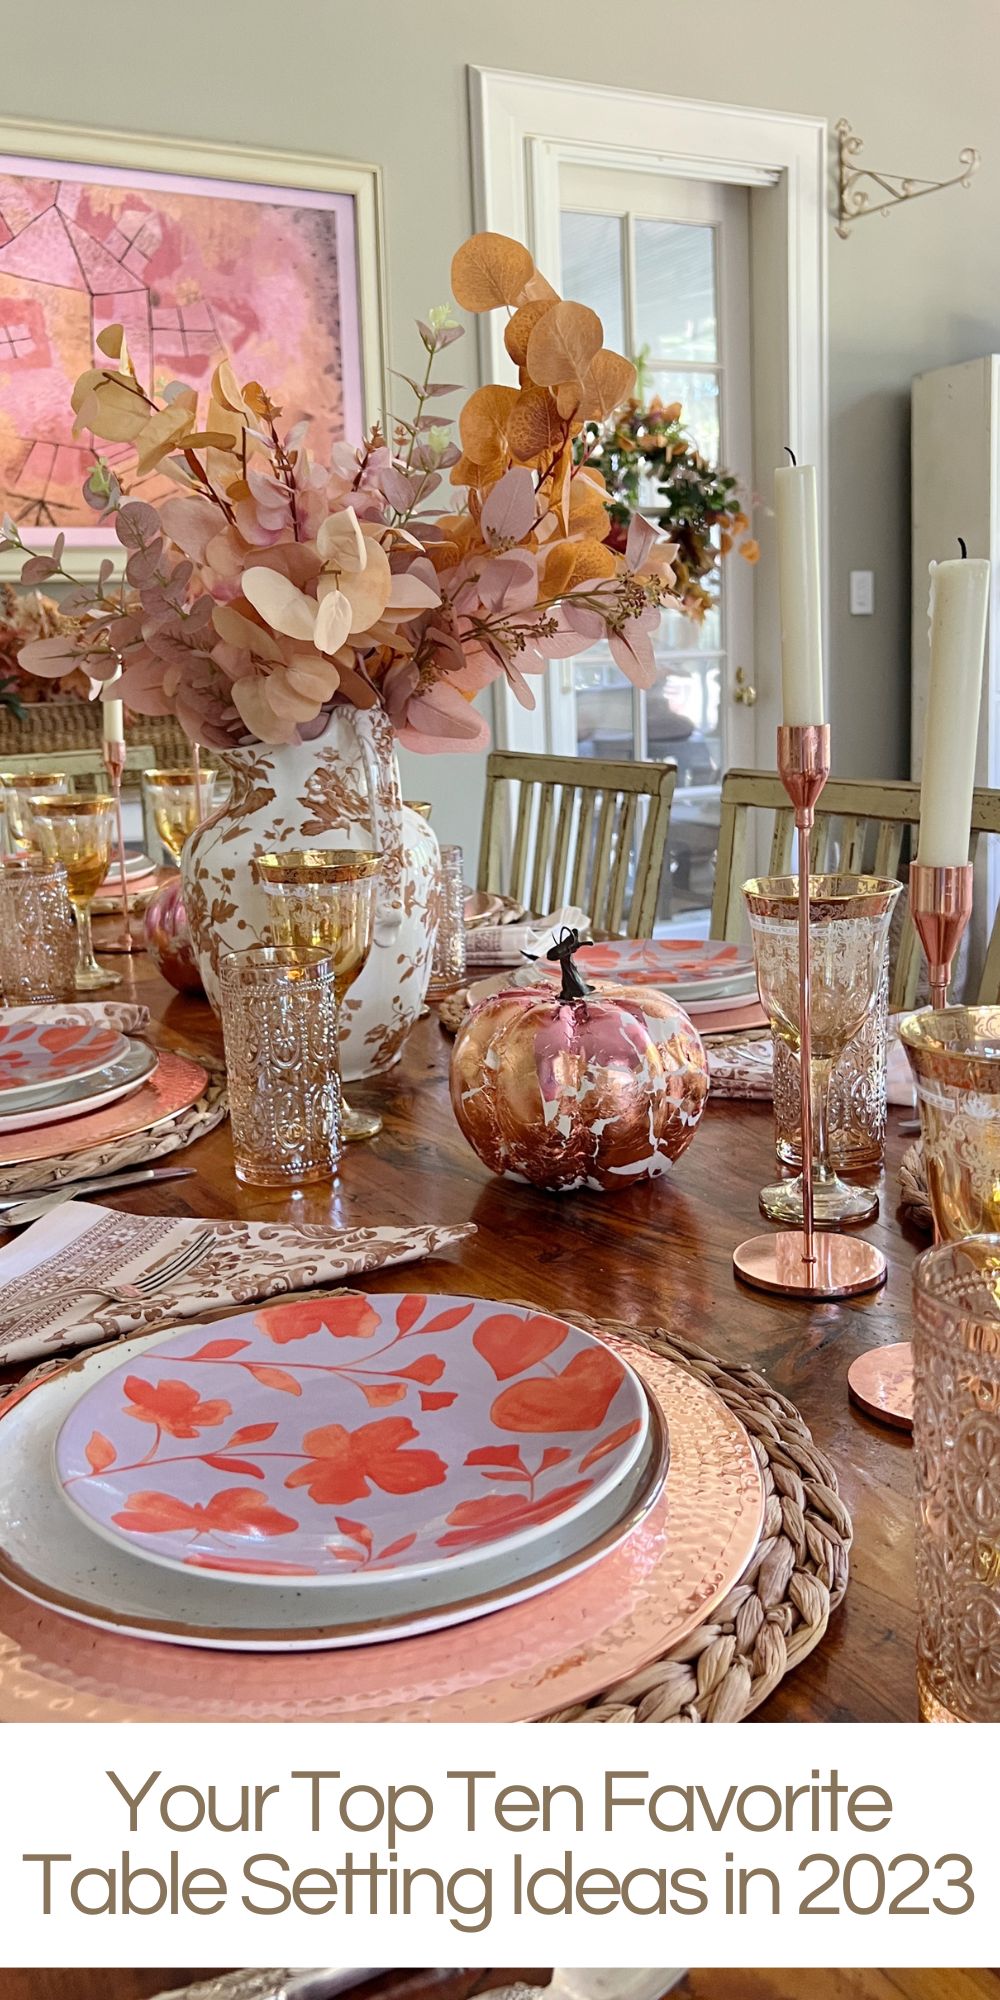 Today's top ten list is a "free choice" and we get to pick our own top ten topics. Of course, I selected your favorite top ten table settings.